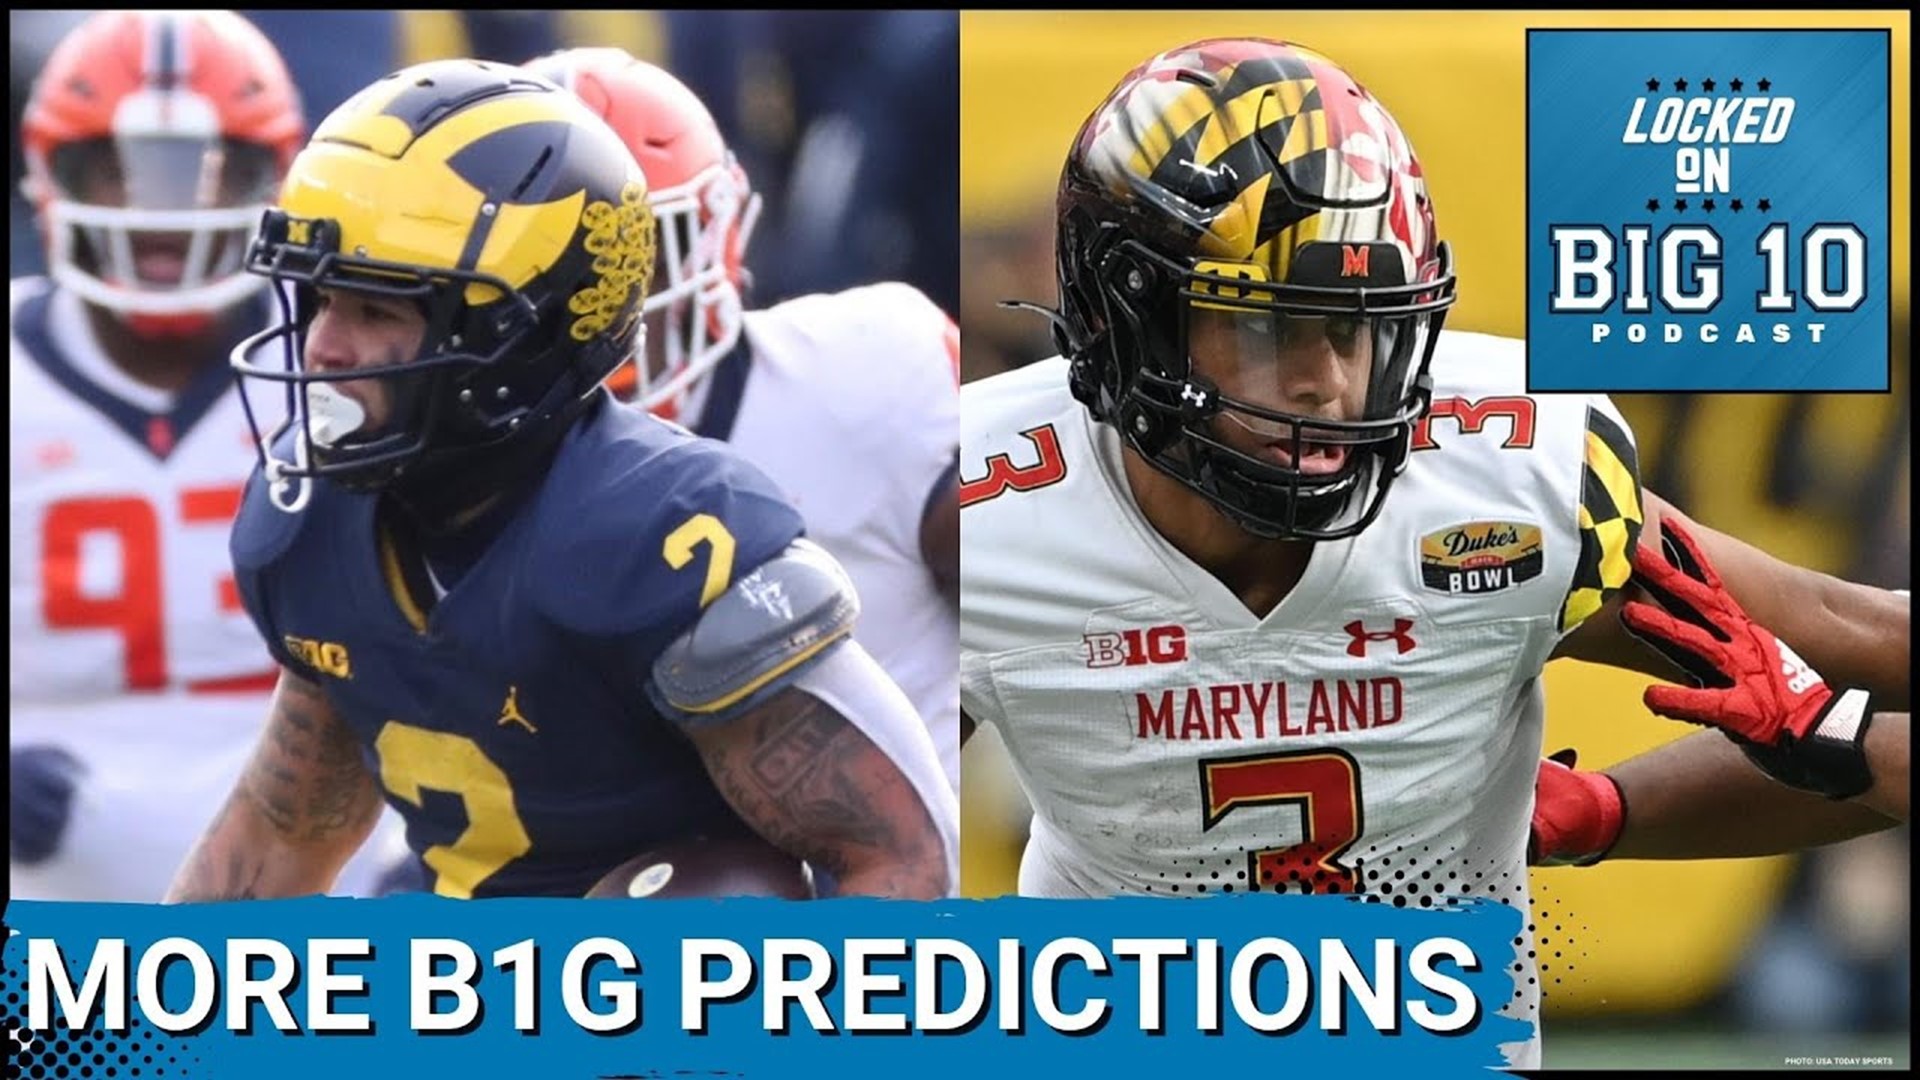 On today's episode of Locked on Big 10, Nate Dickinson goes into the latest of 2023 football predictions from 247Sports.